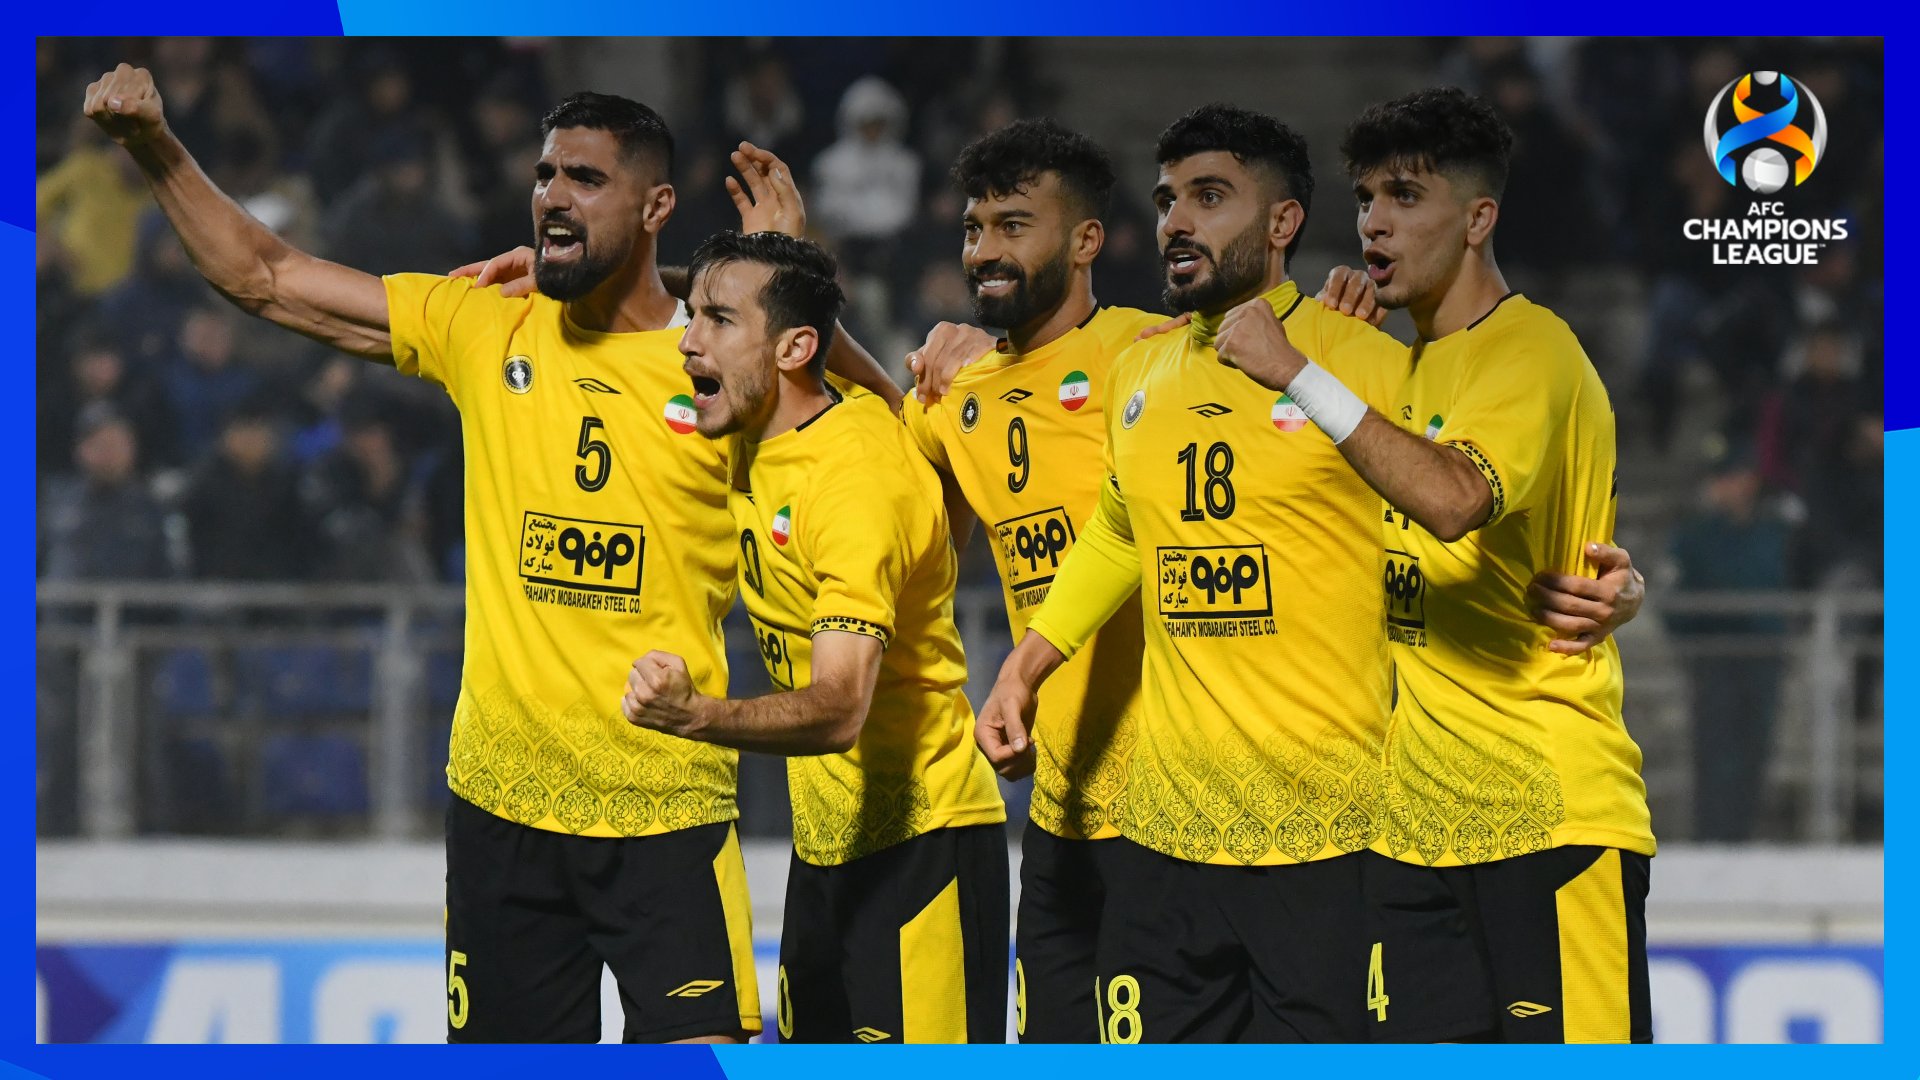 ACL on X: ⚽️ GOAL, 🇮🇷 Sepahan FC 1️⃣- 0️⃣Air Force Club 🇮🇶 Ahmadzadeh  touches it home to give Sepahan FC an early lead! 📺 Watch LIVE   #ACL